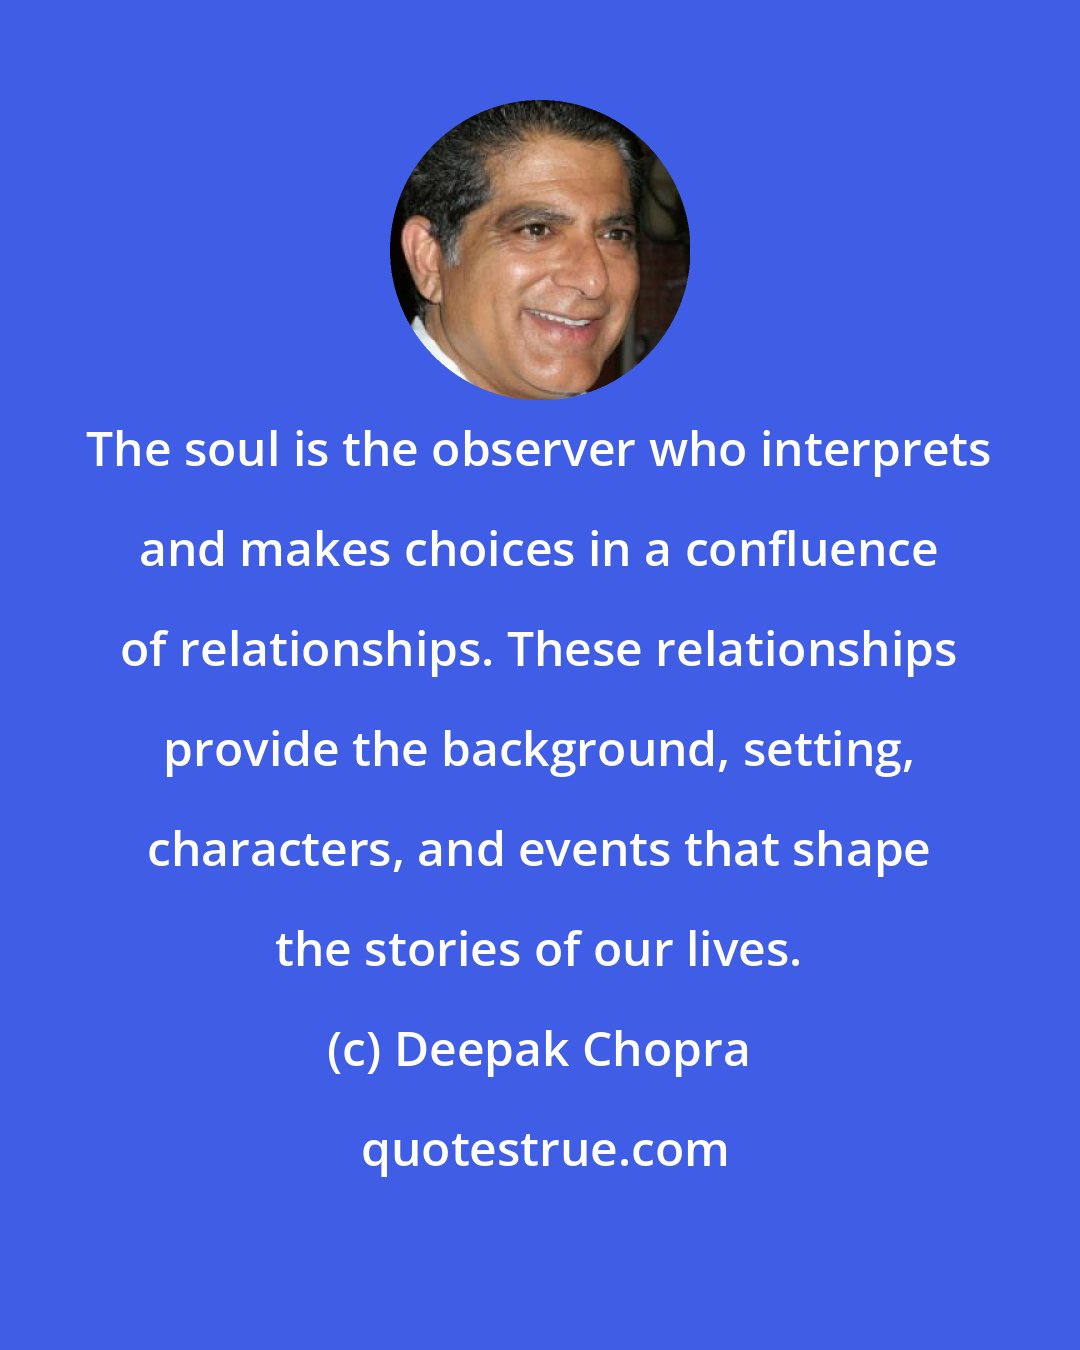 Deepak Chopra: The soul is the observer who interprets and makes choices in a confluence of relationships. These relationships provide the background, setting, characters, and events that shape the stories of our lives.